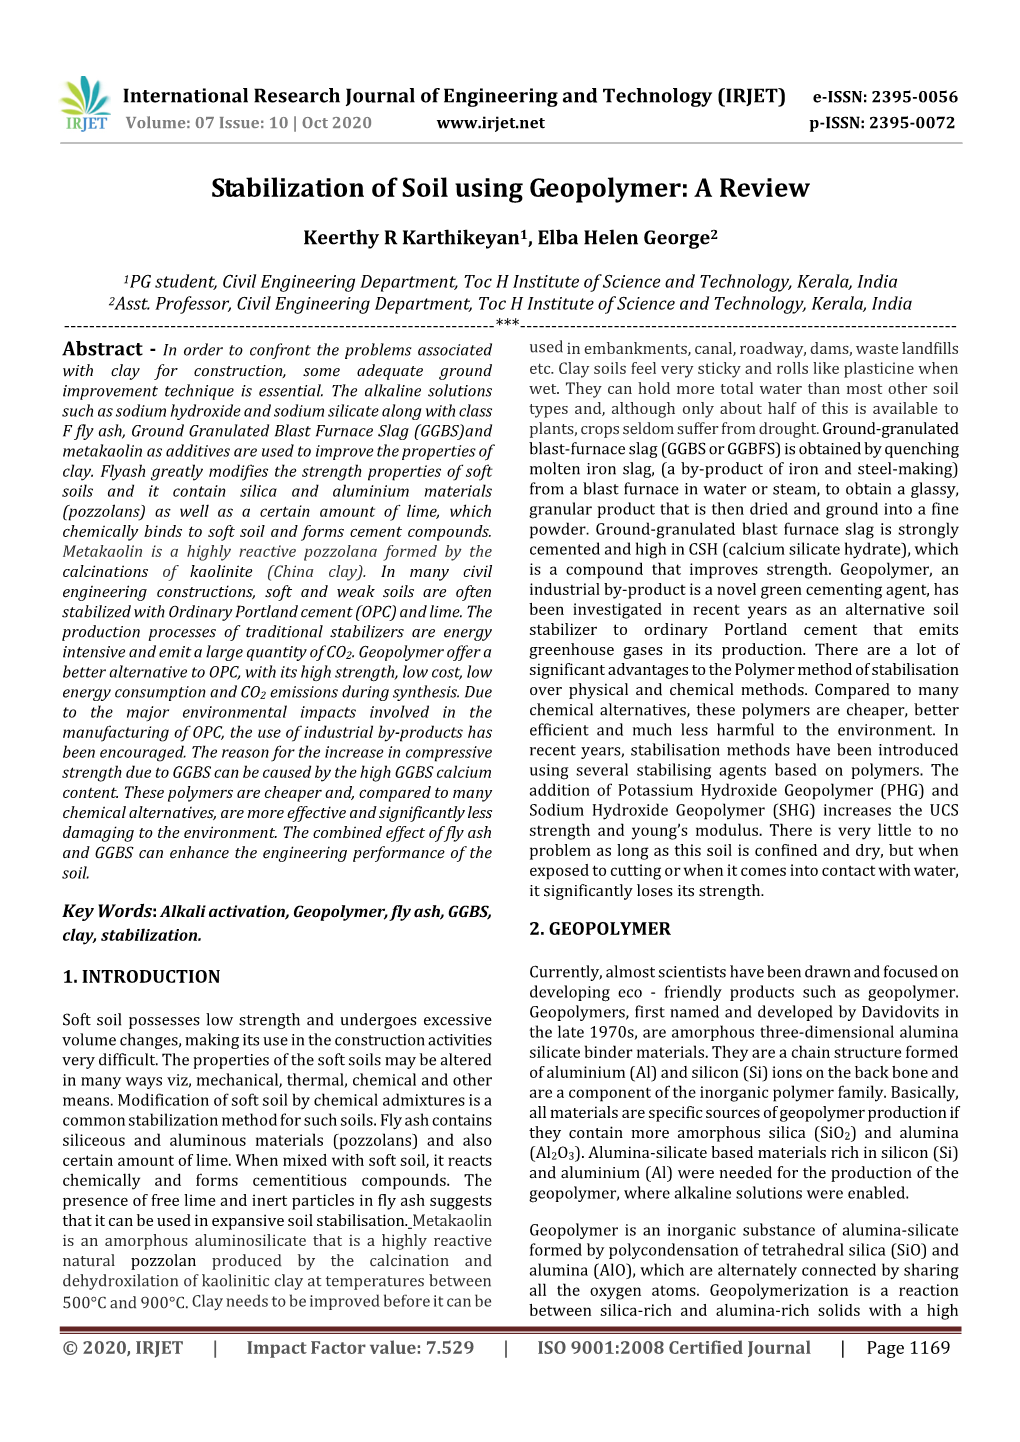 Stabilization of Soil Using Geopolymer: a Review